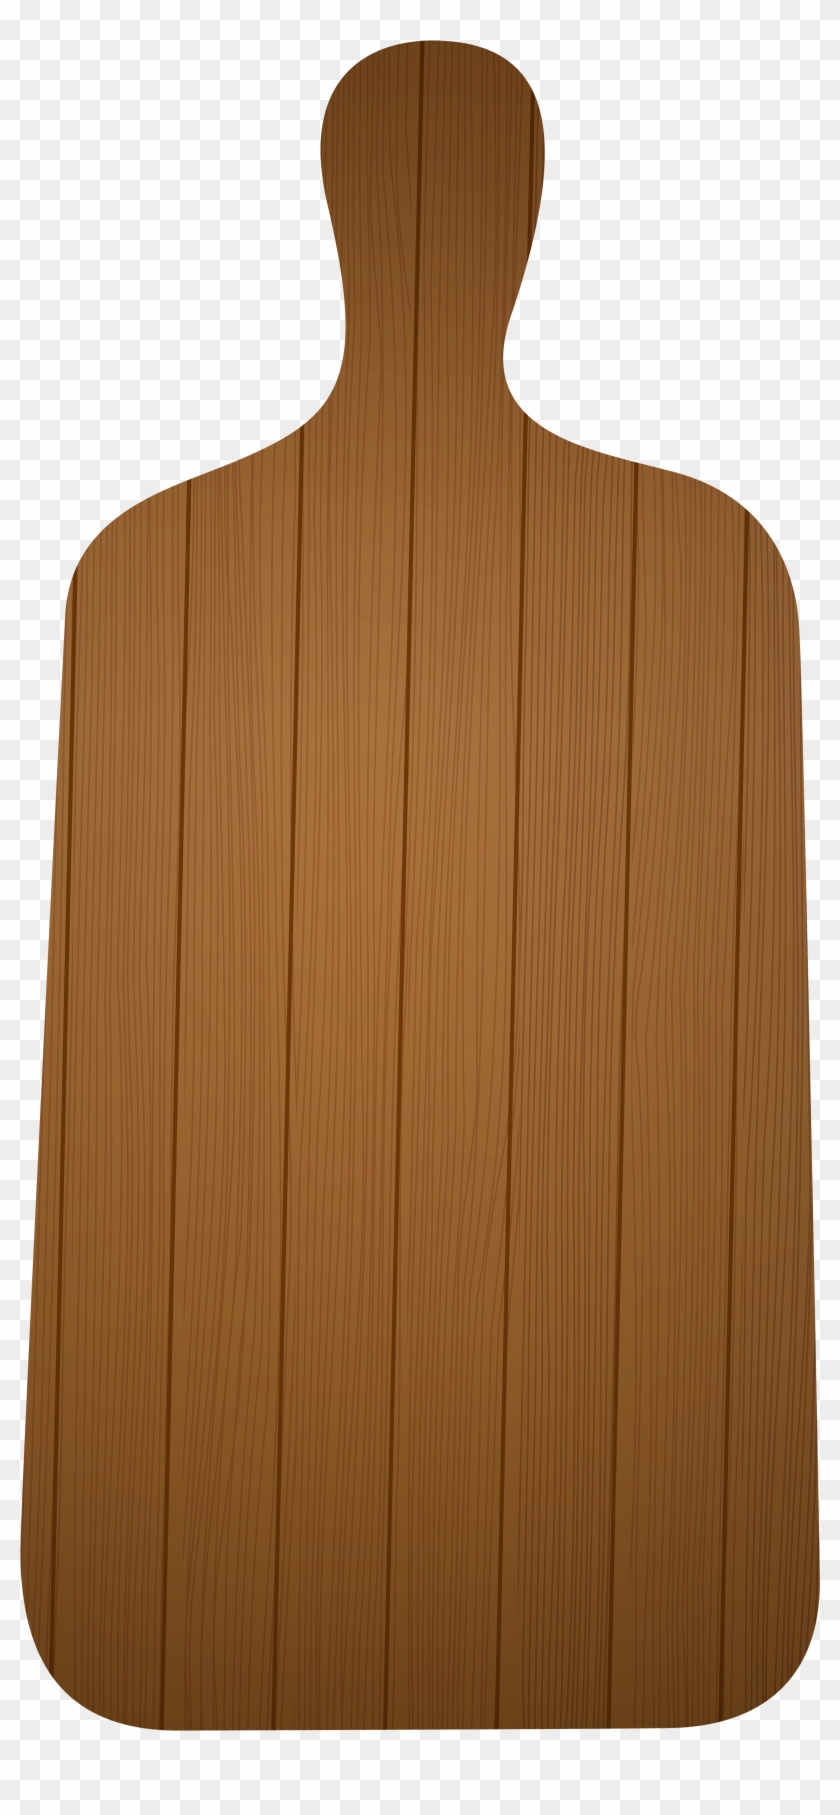 Wooden Cutting Boards Png Clipart - Wooden Cutting Board Clipart #1013366